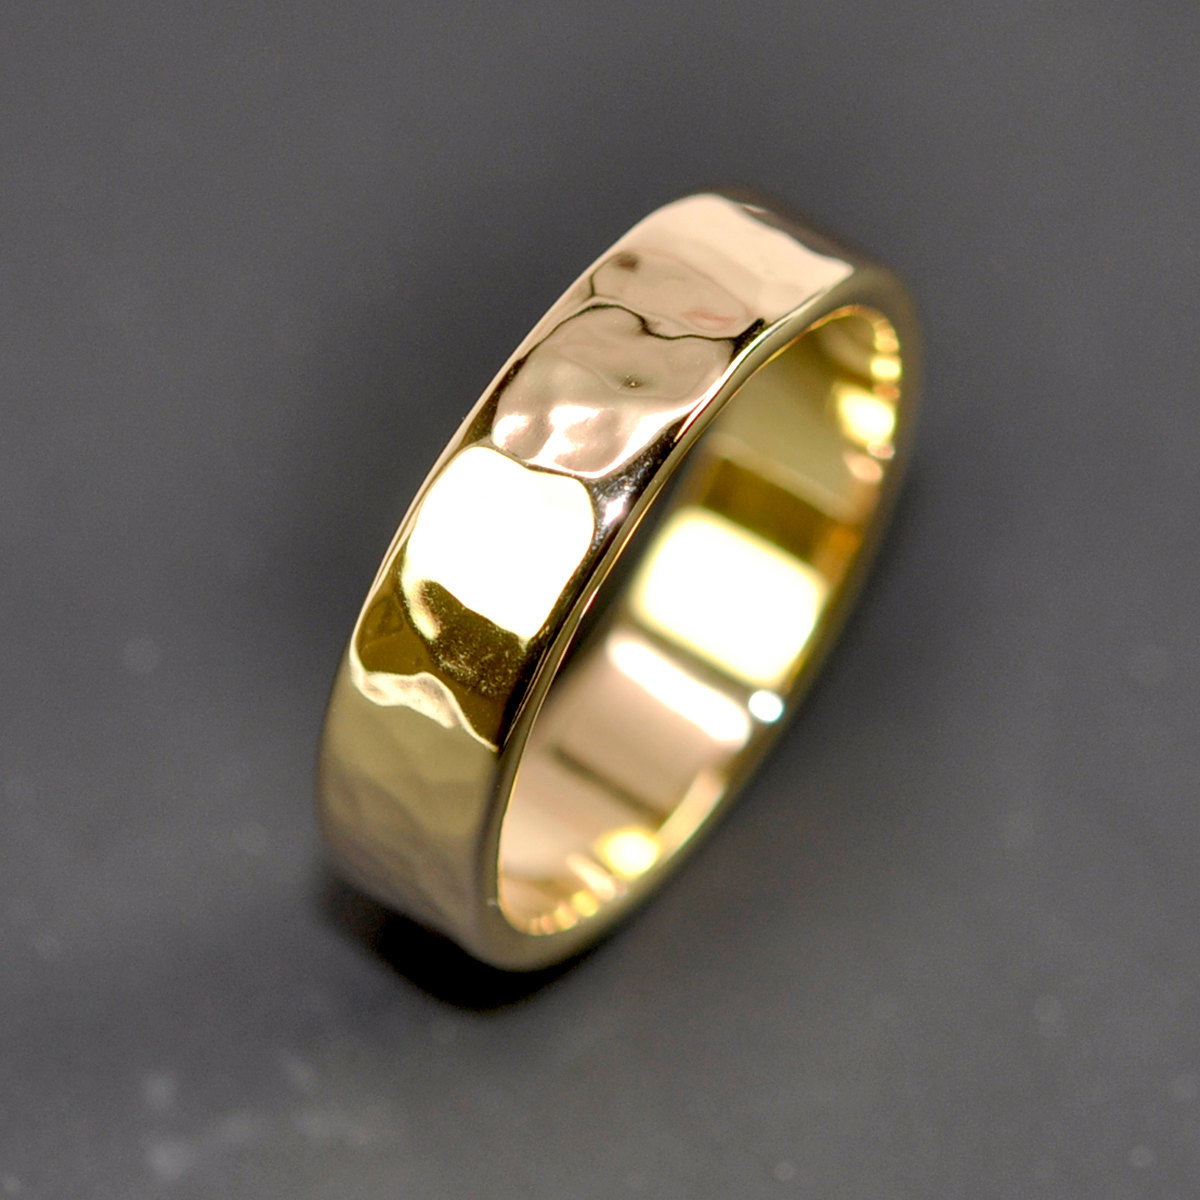 Wedding Bands Yellow Gold
 18K Yellow Gold Men s Wedding Band Hammered 5mm by